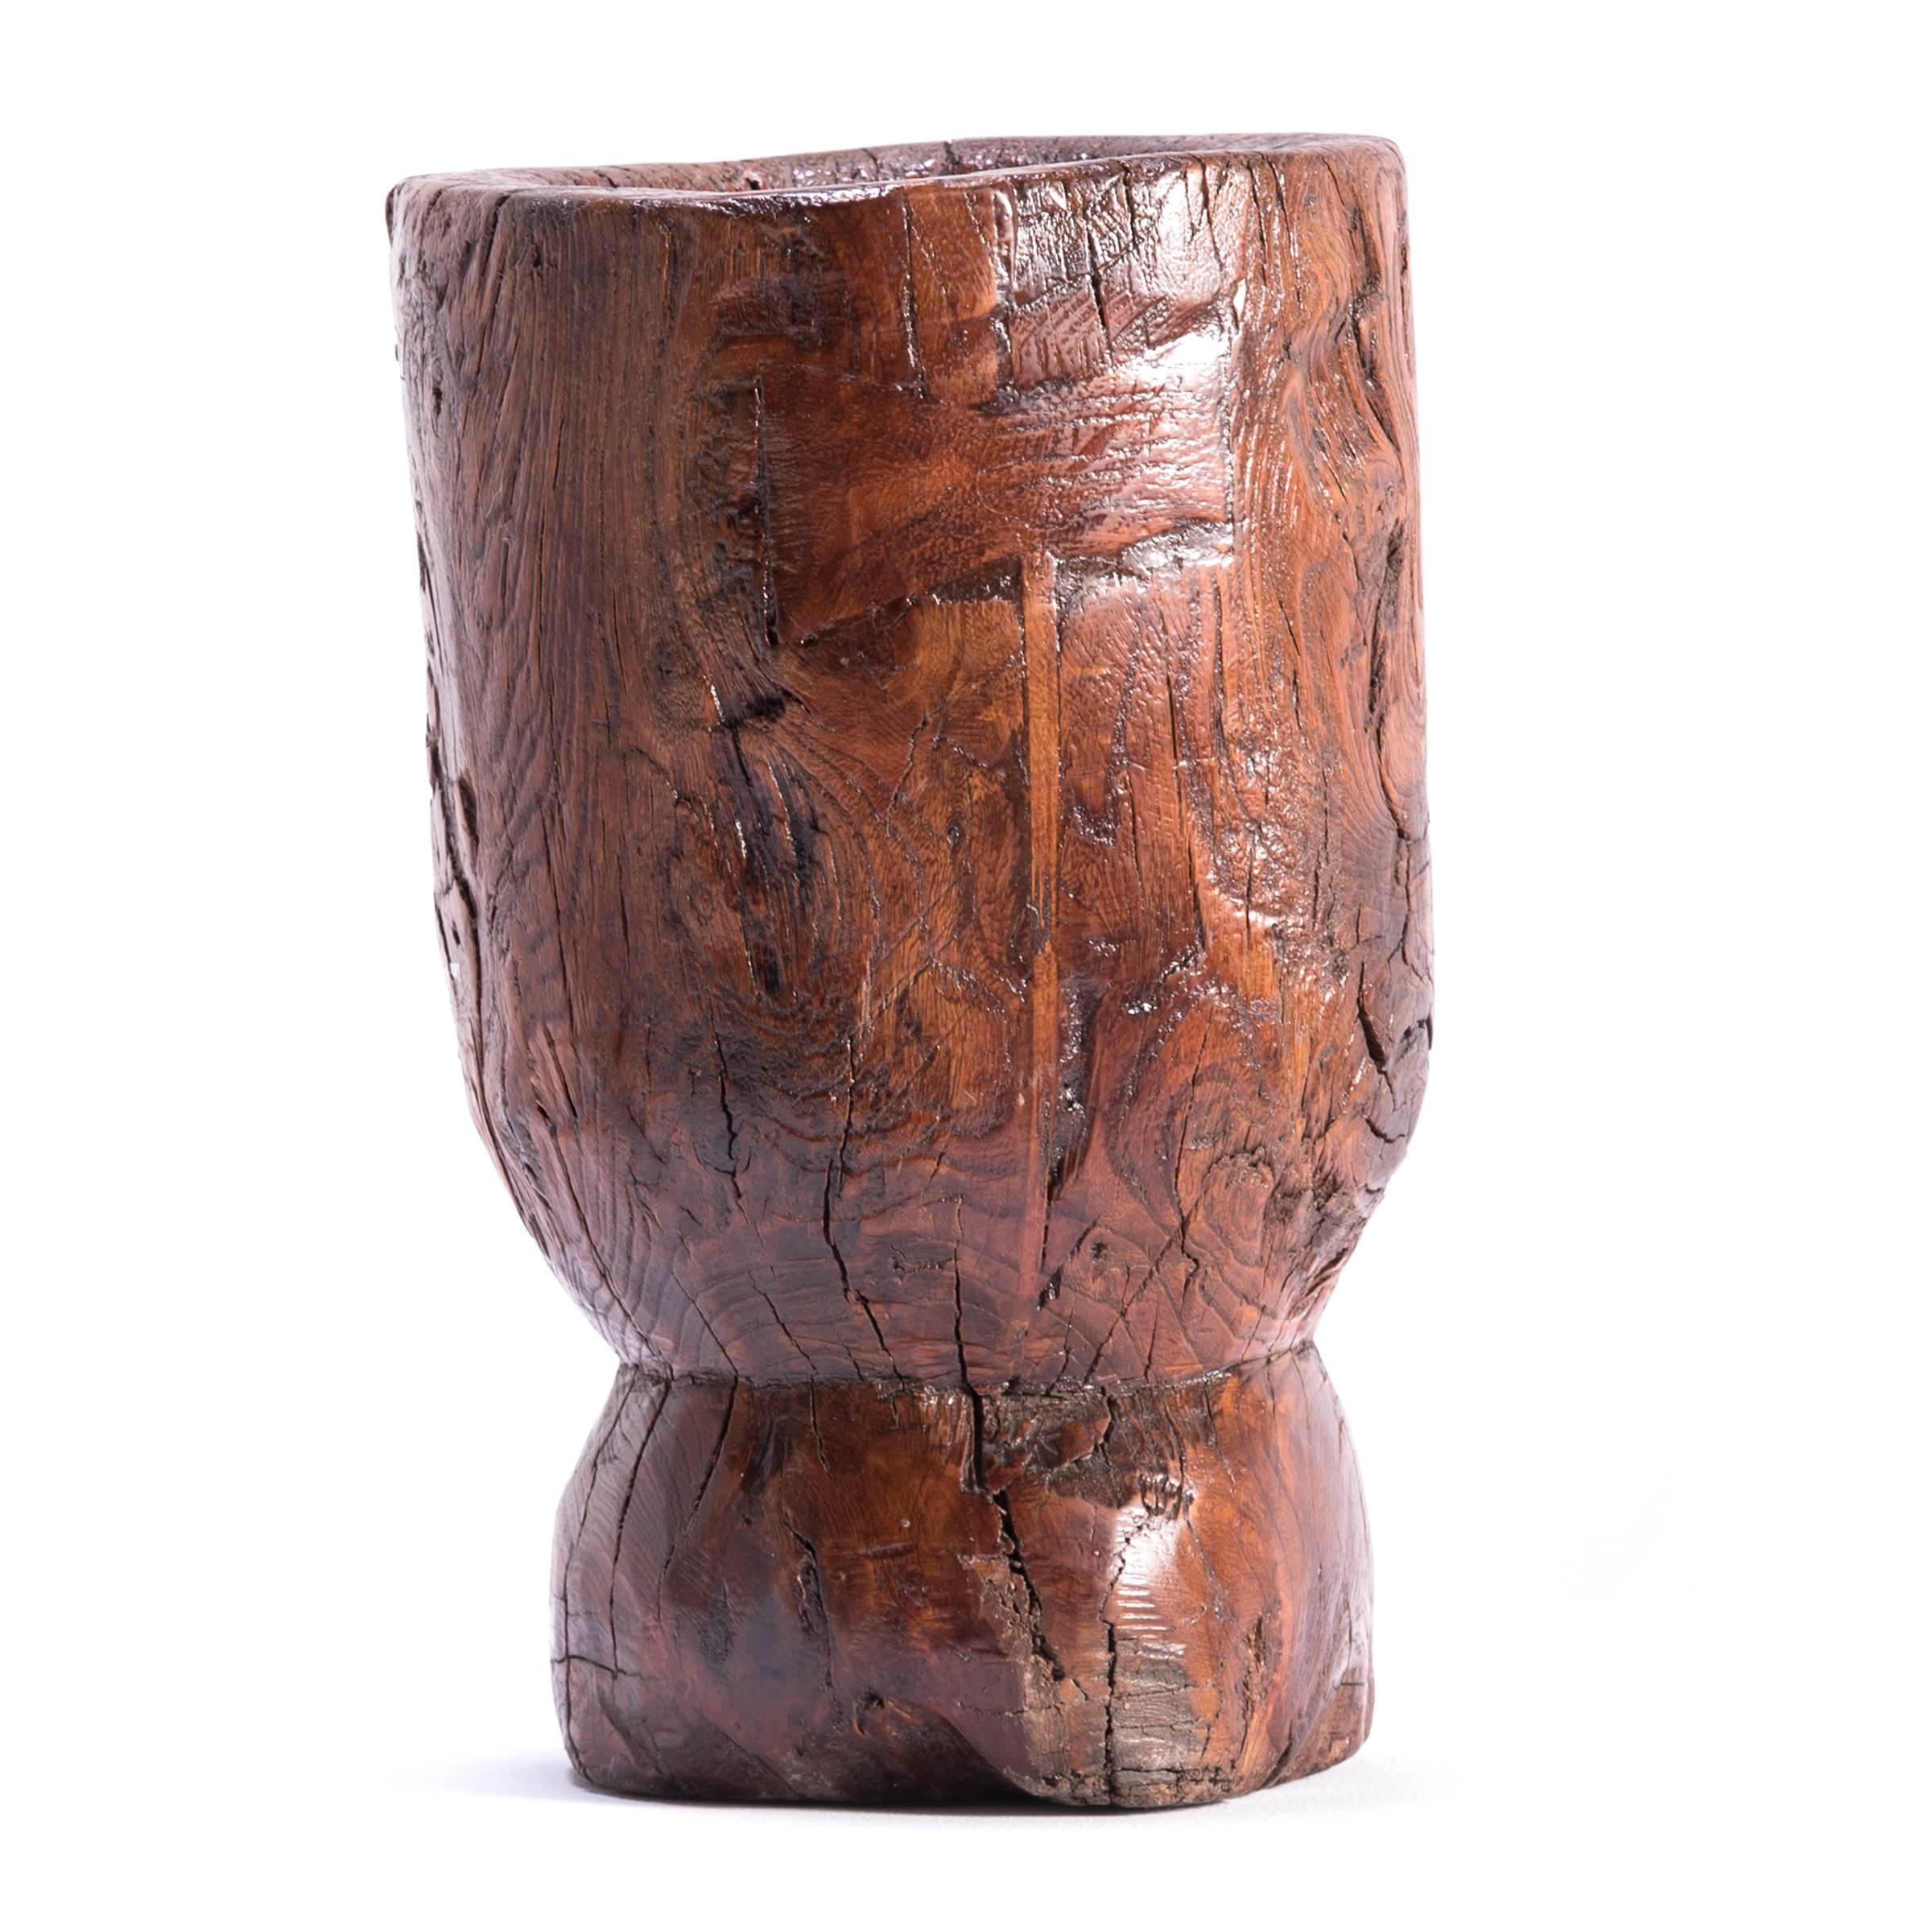 This organically shaped vessel was carved from a single piece of wood over 150 years ago in Mongolia and was likely used as a mortar by a traditional Chinese apothecary to grind natural ingredients for special medicines. It is carved out of a wood